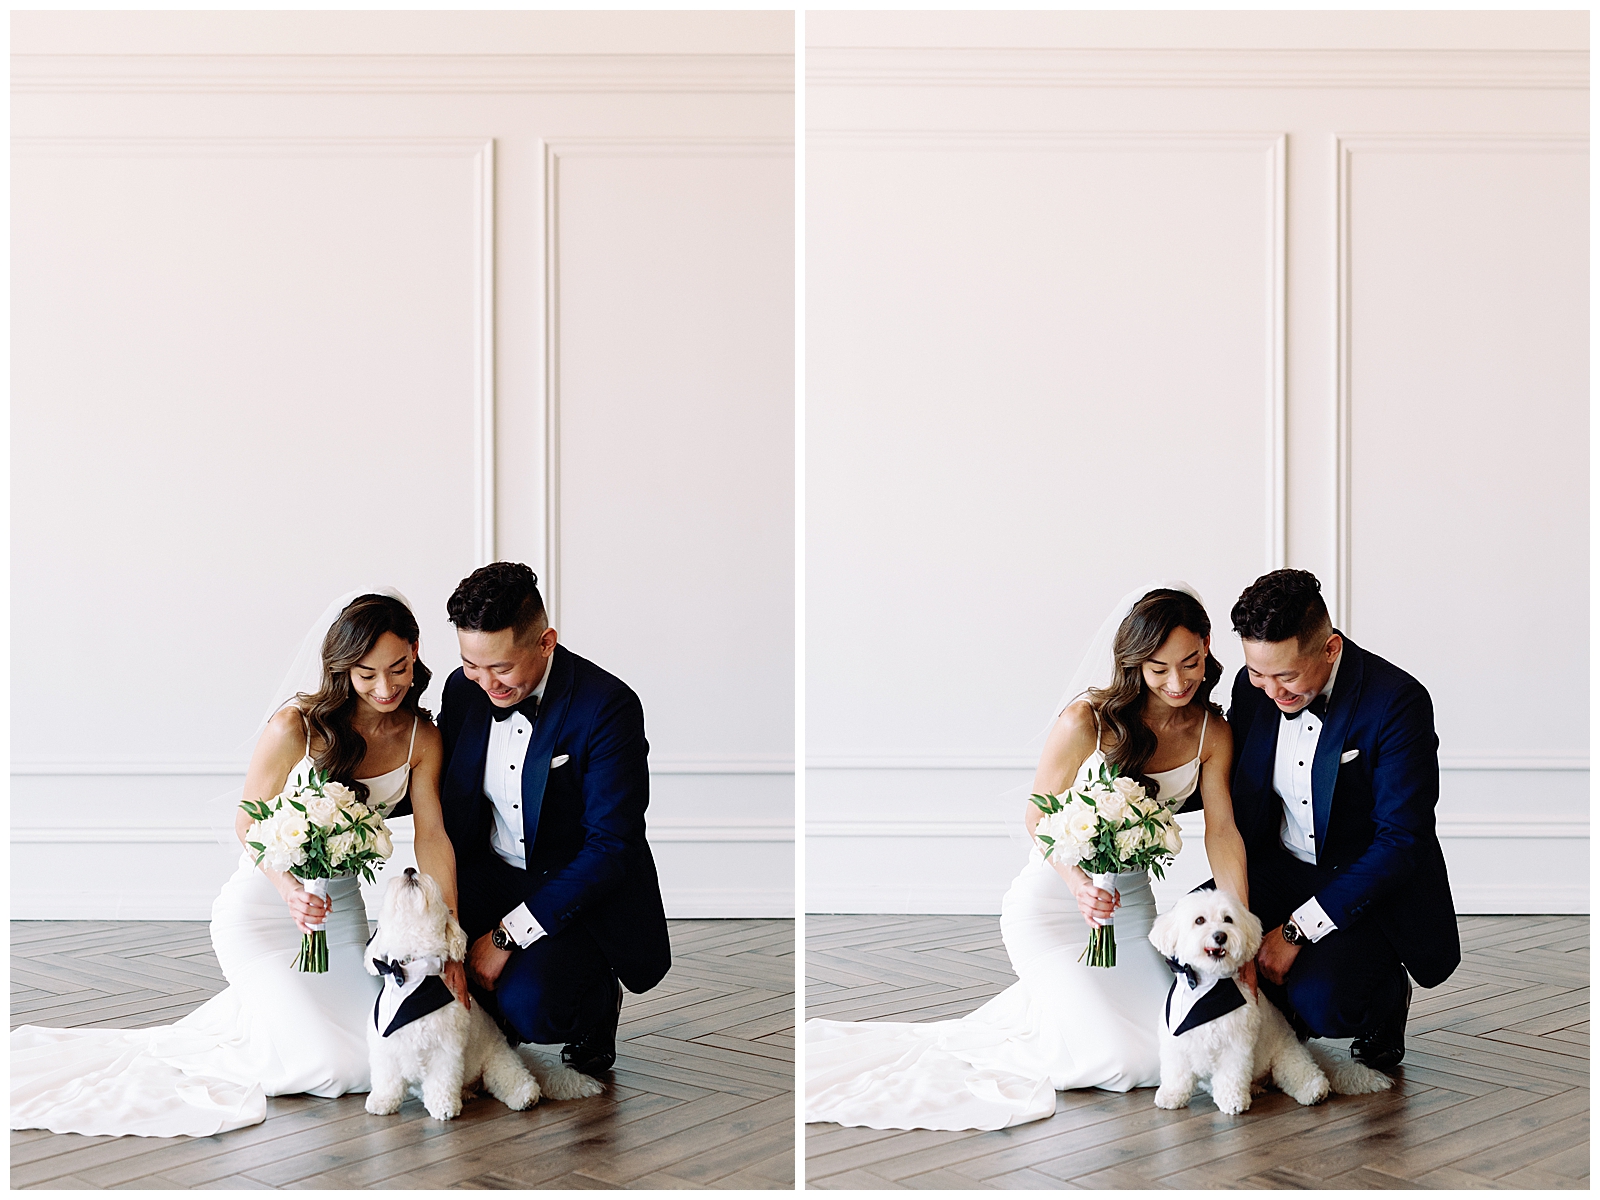 Couple Portraits with Happy Cute Dog Excited Sophisticated Toronto at Arlington Estate Wedding Venue, Summer Intimate Elopement| Jacqueline James Photography for modern wild romantics